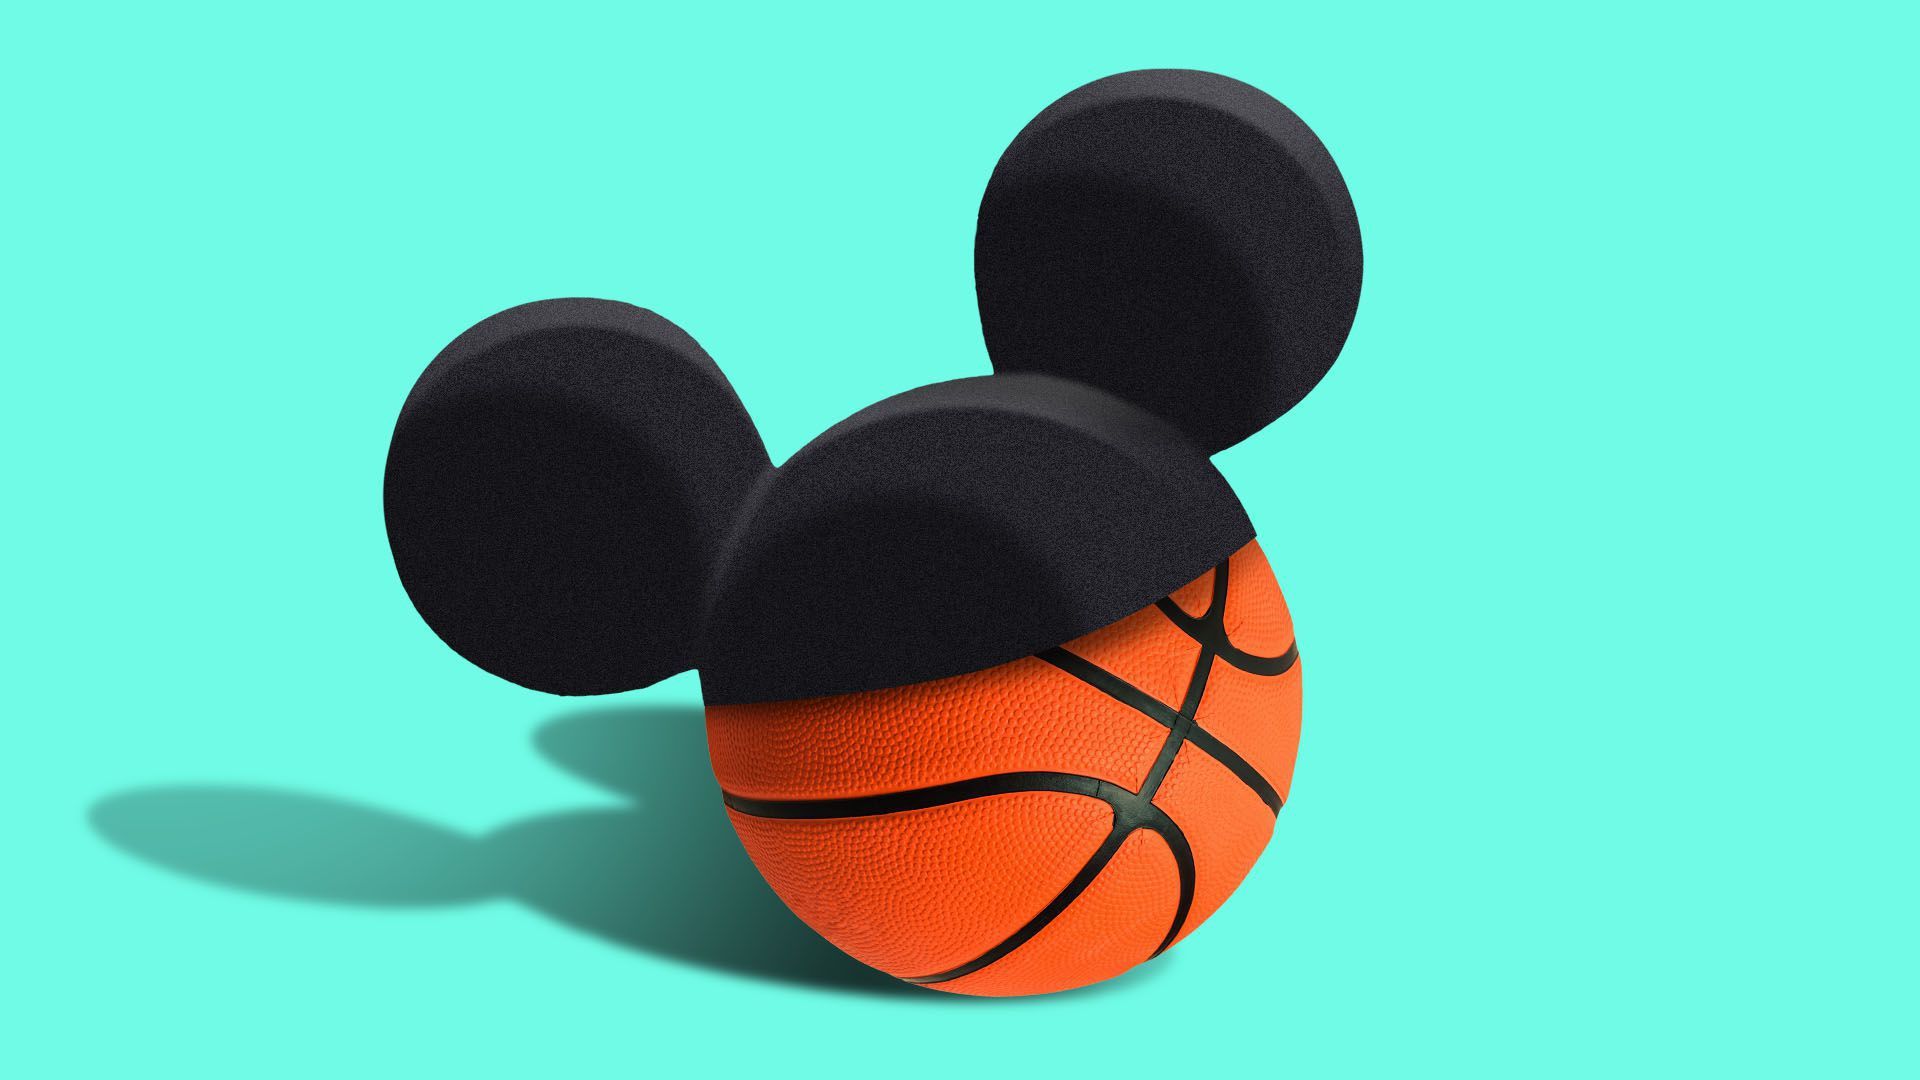 Illustration of a basketball with mouse ears.